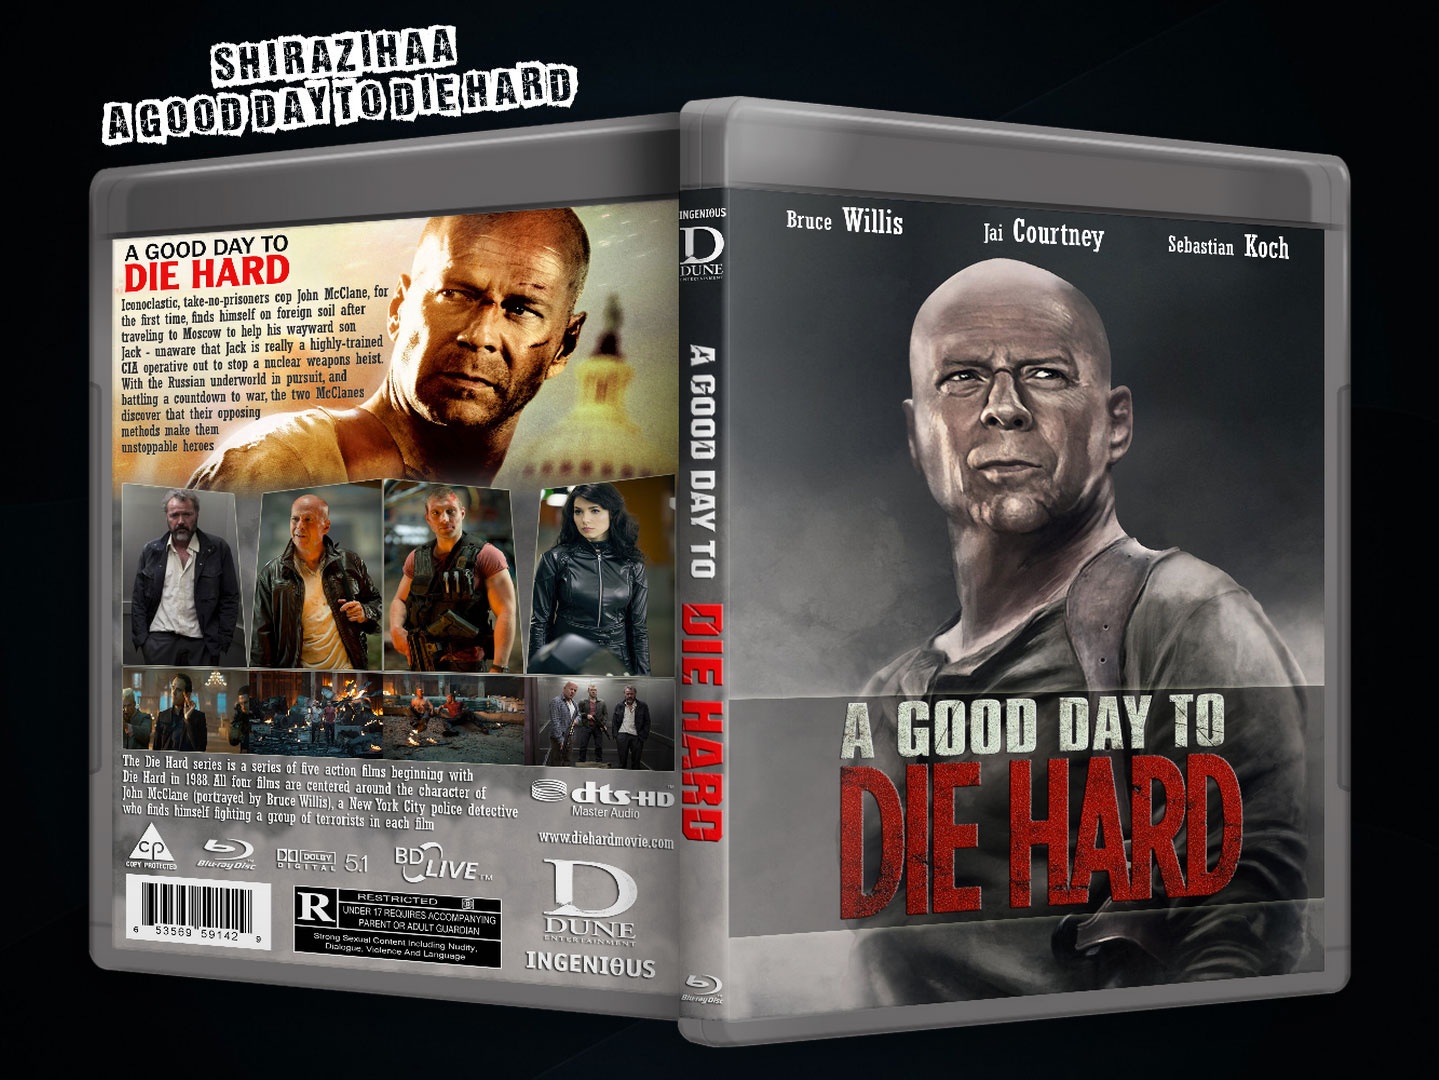 A Good Day To Die Hard box cover